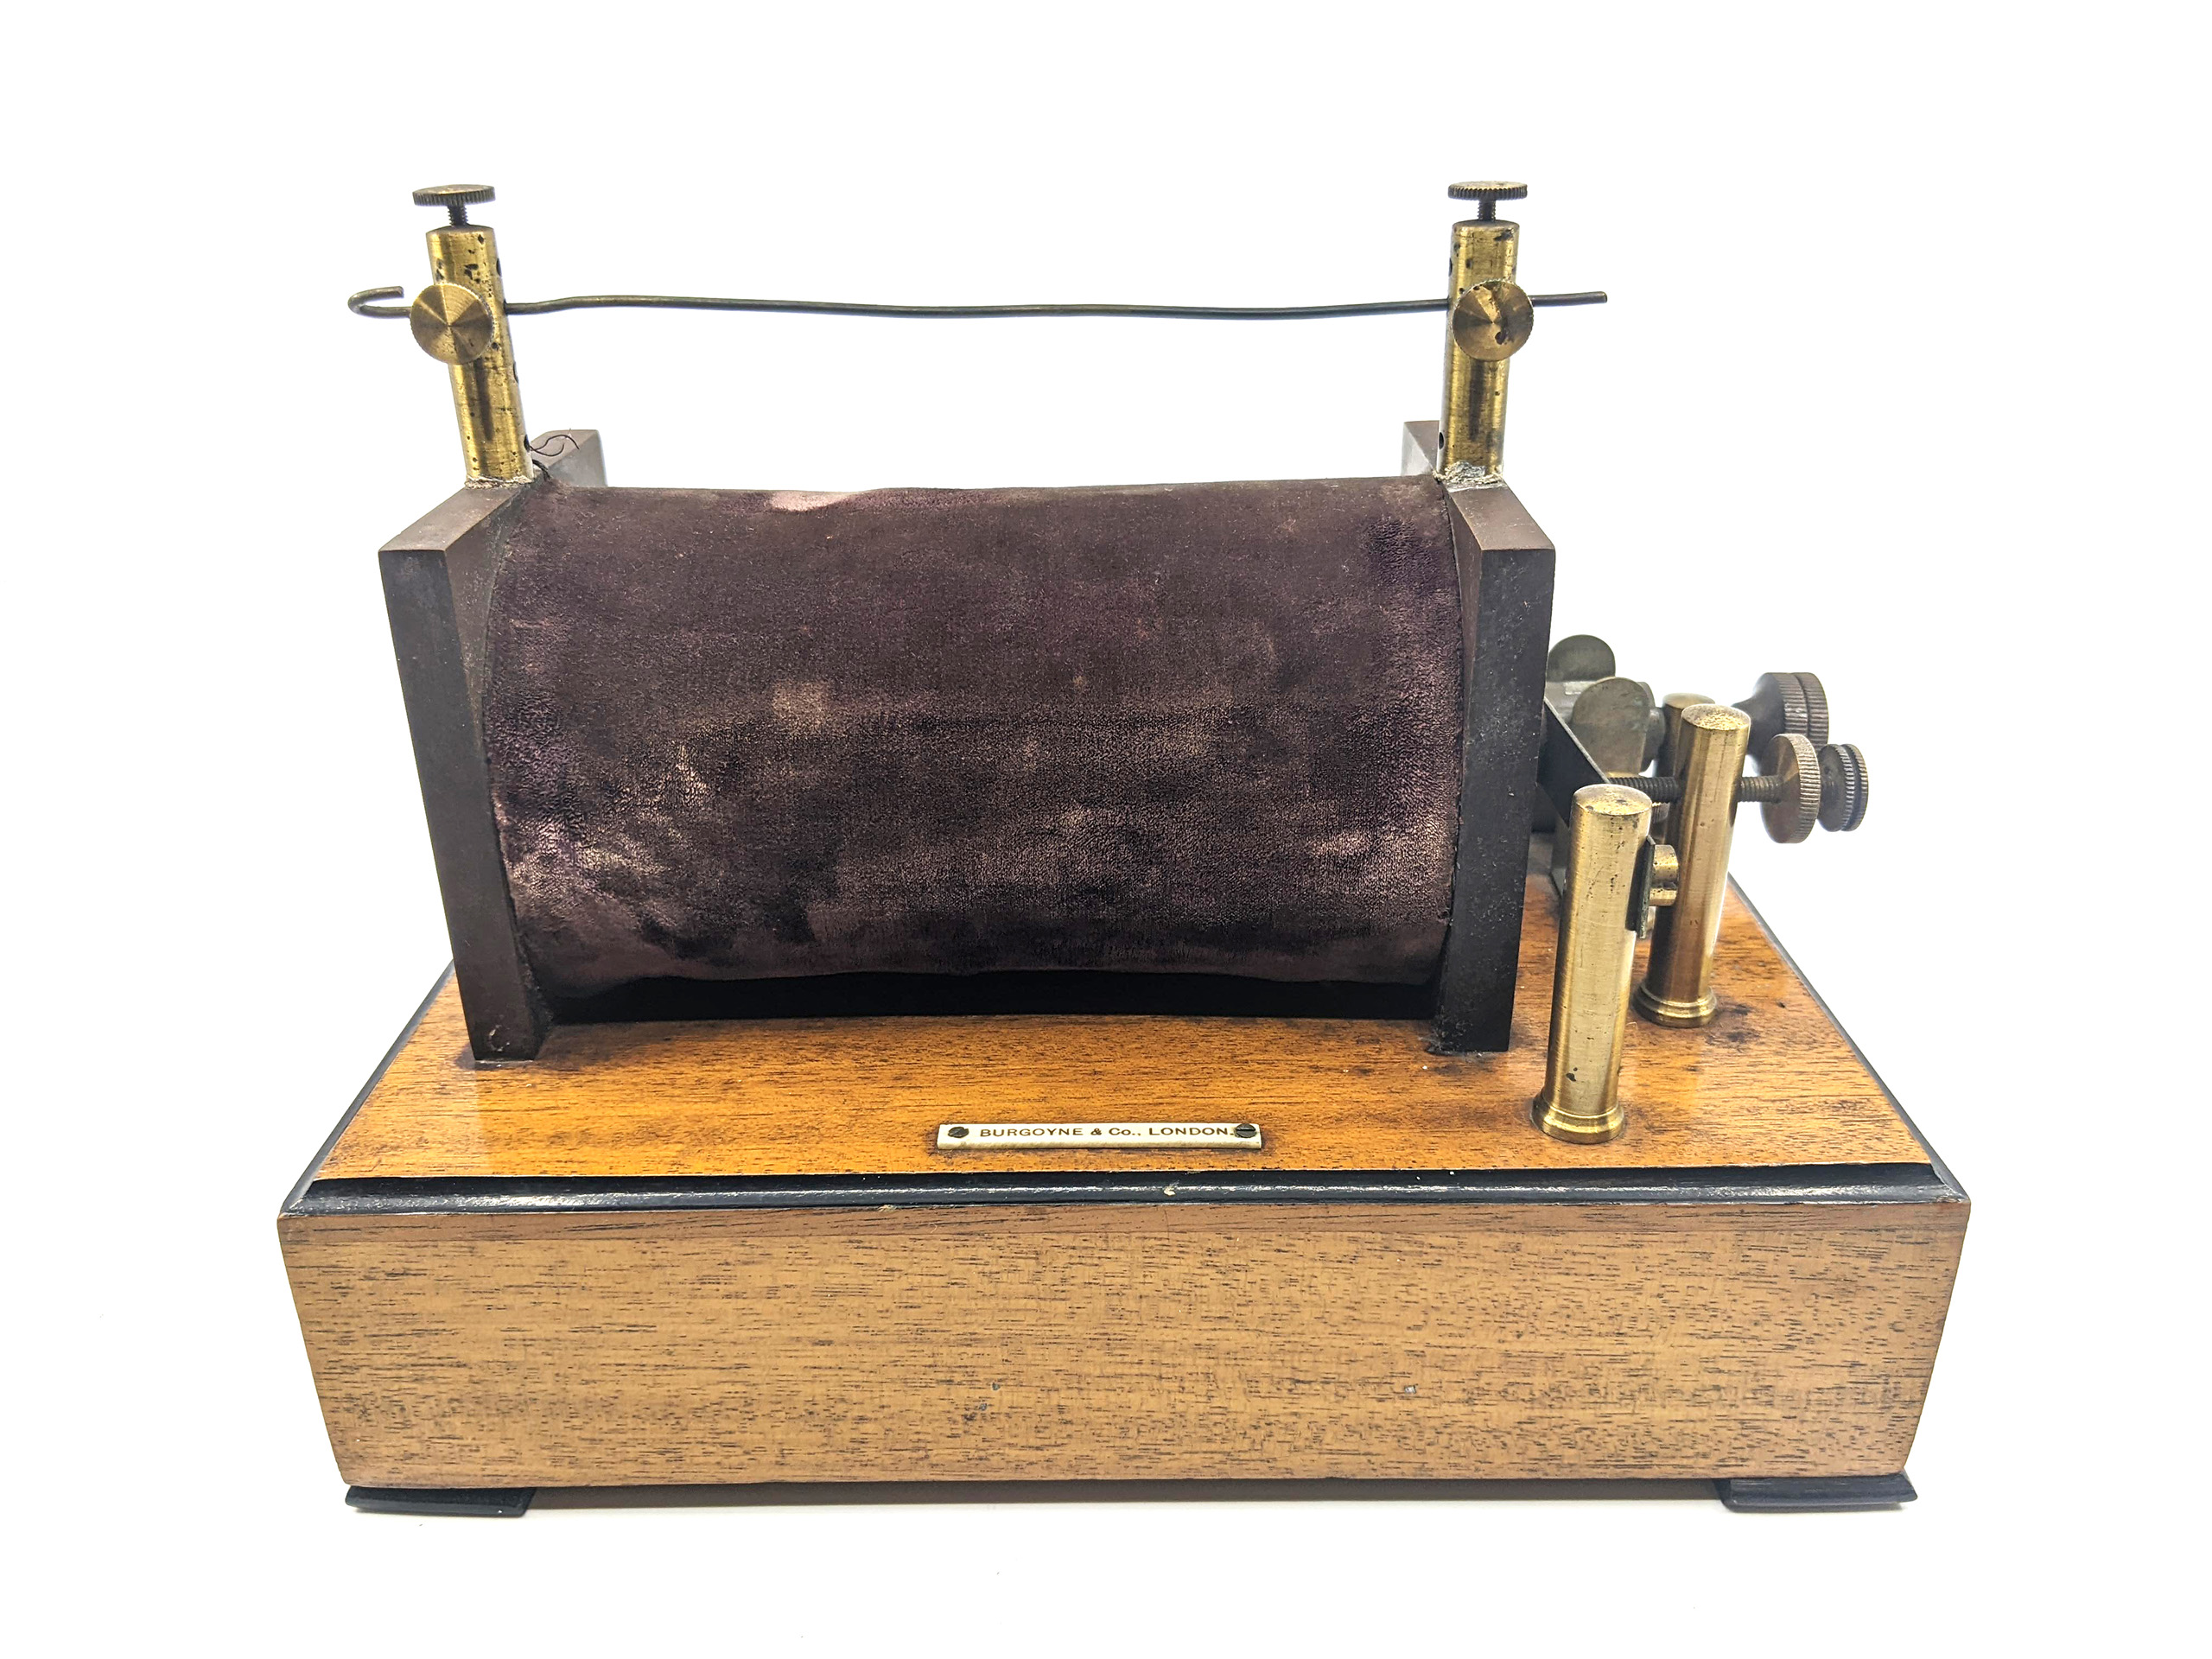 X-ray Induction coil, Burgoyne & Co, c. 1896. Collection of the Marks-Hirschfeld Museum of Medical History.